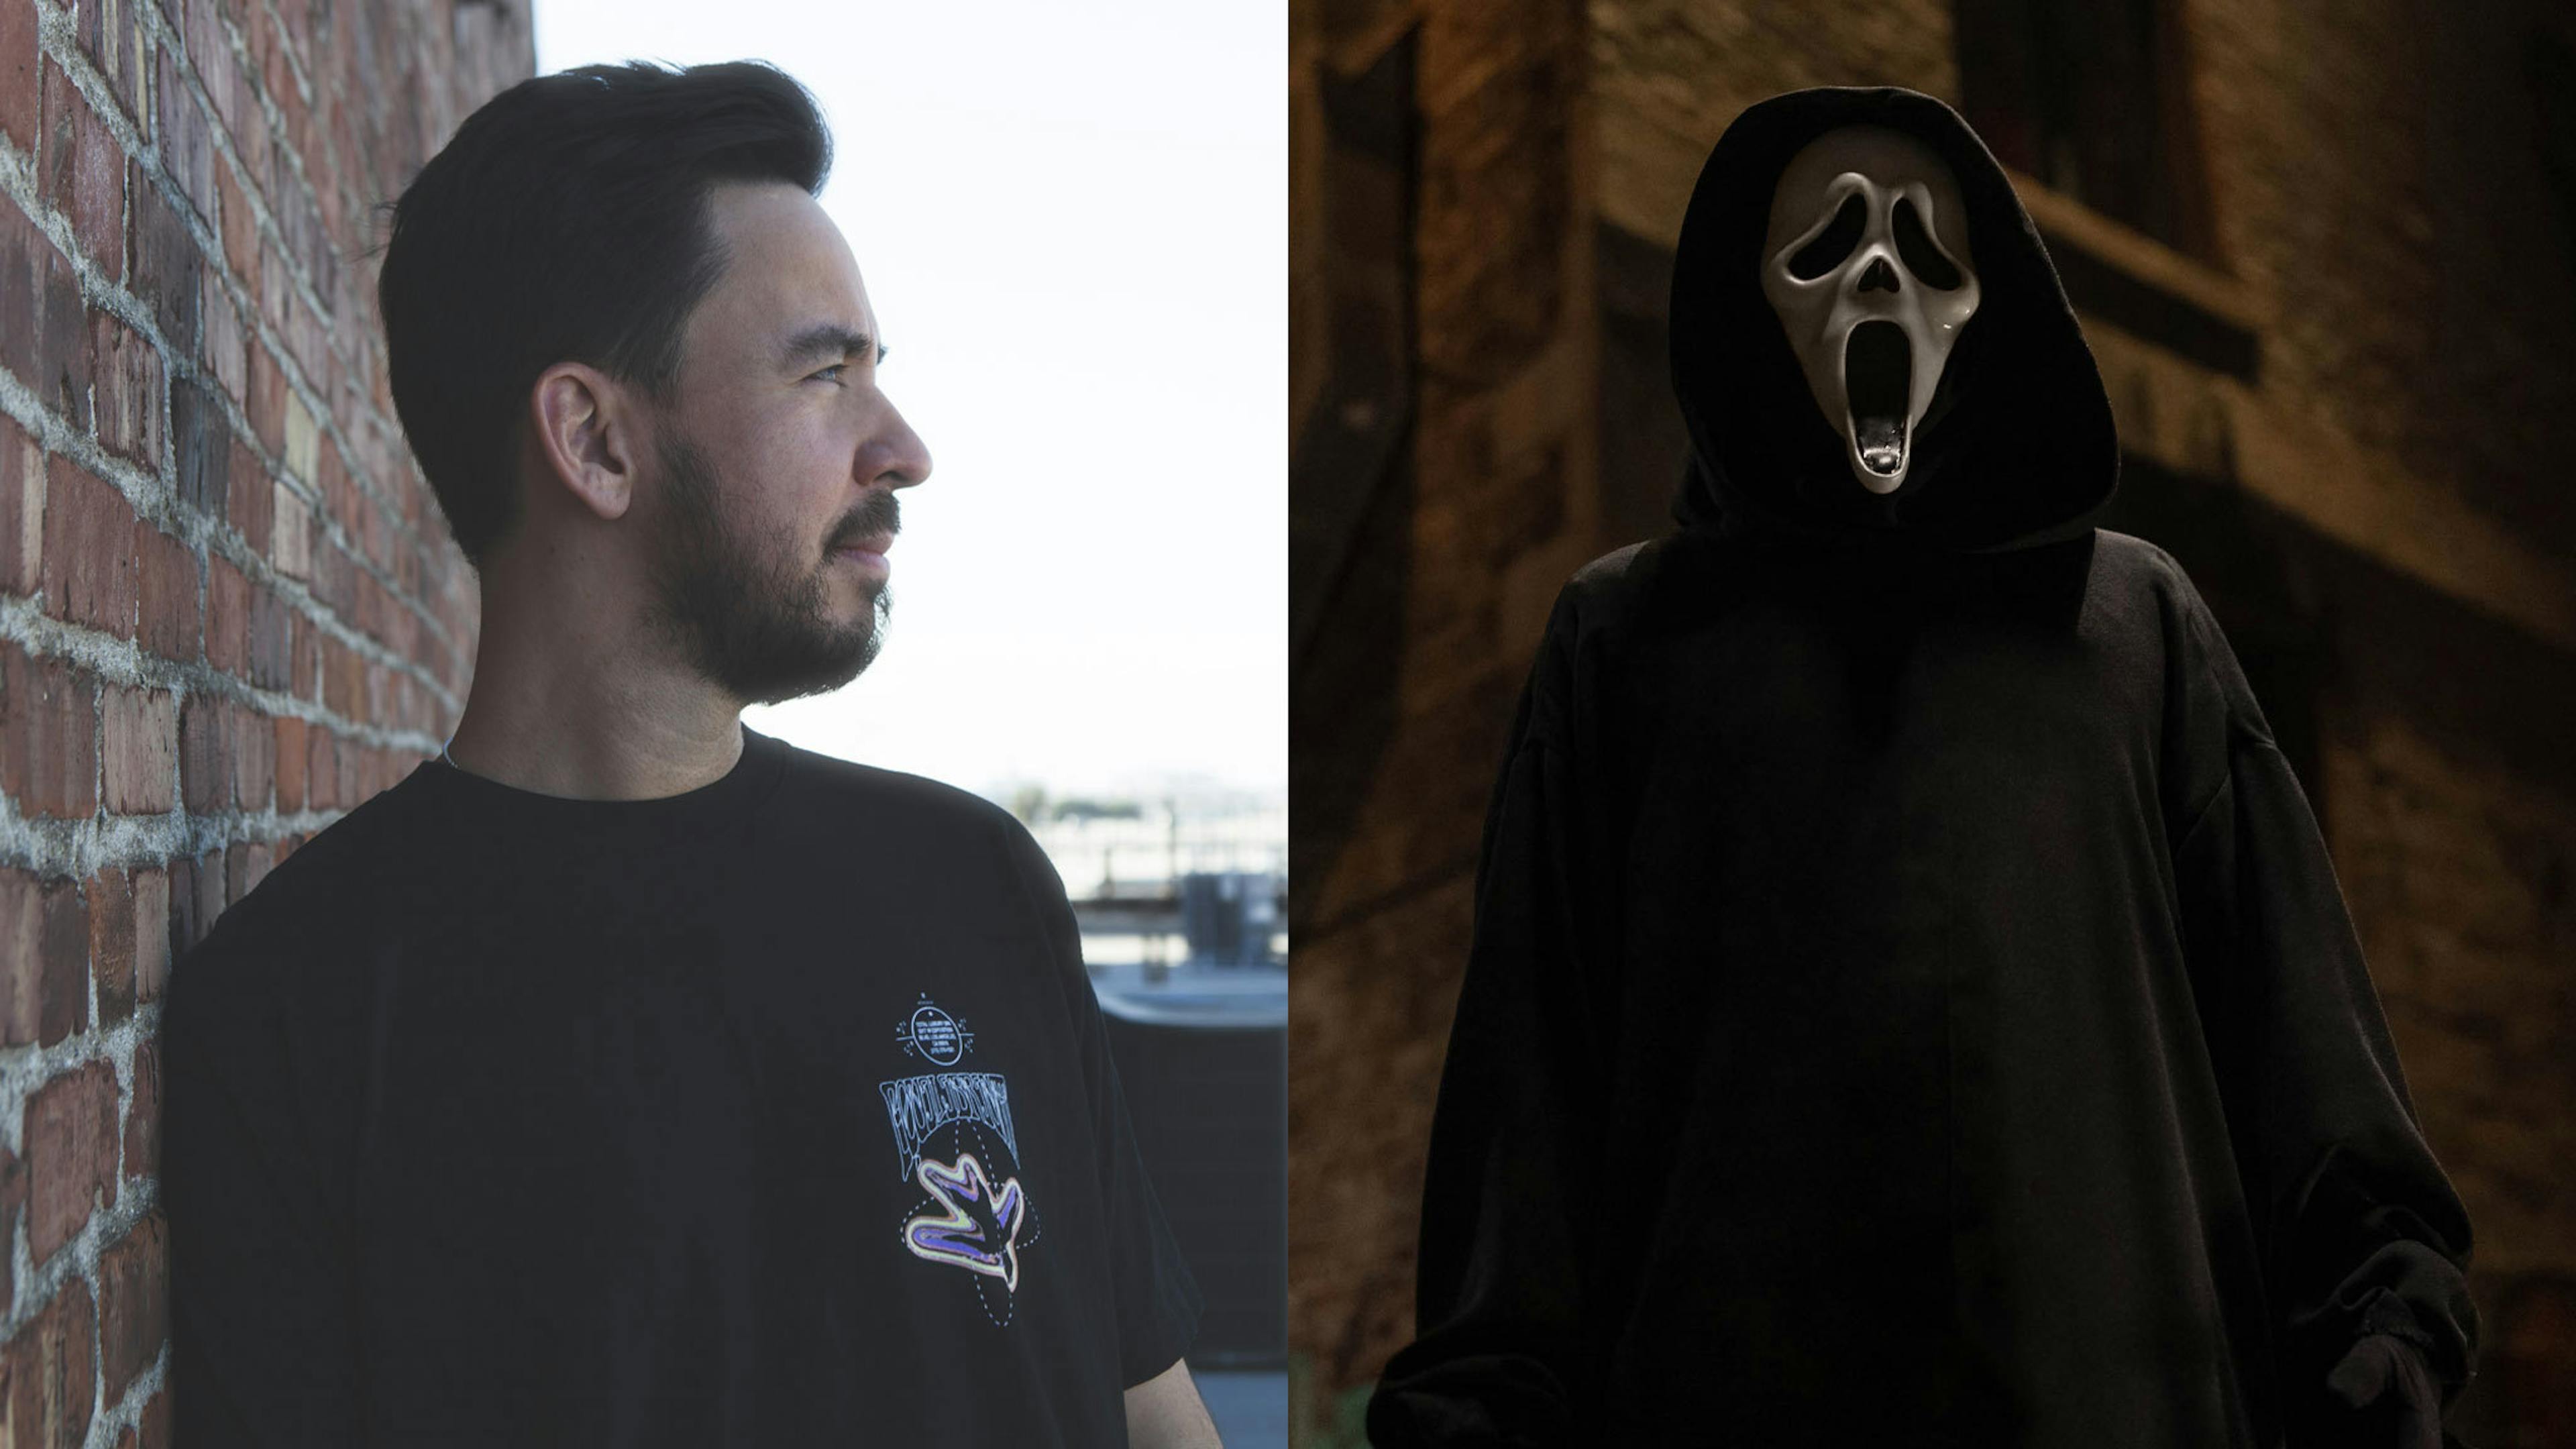 Mike Shinoda reveals that he has a new solo song in Scream VI